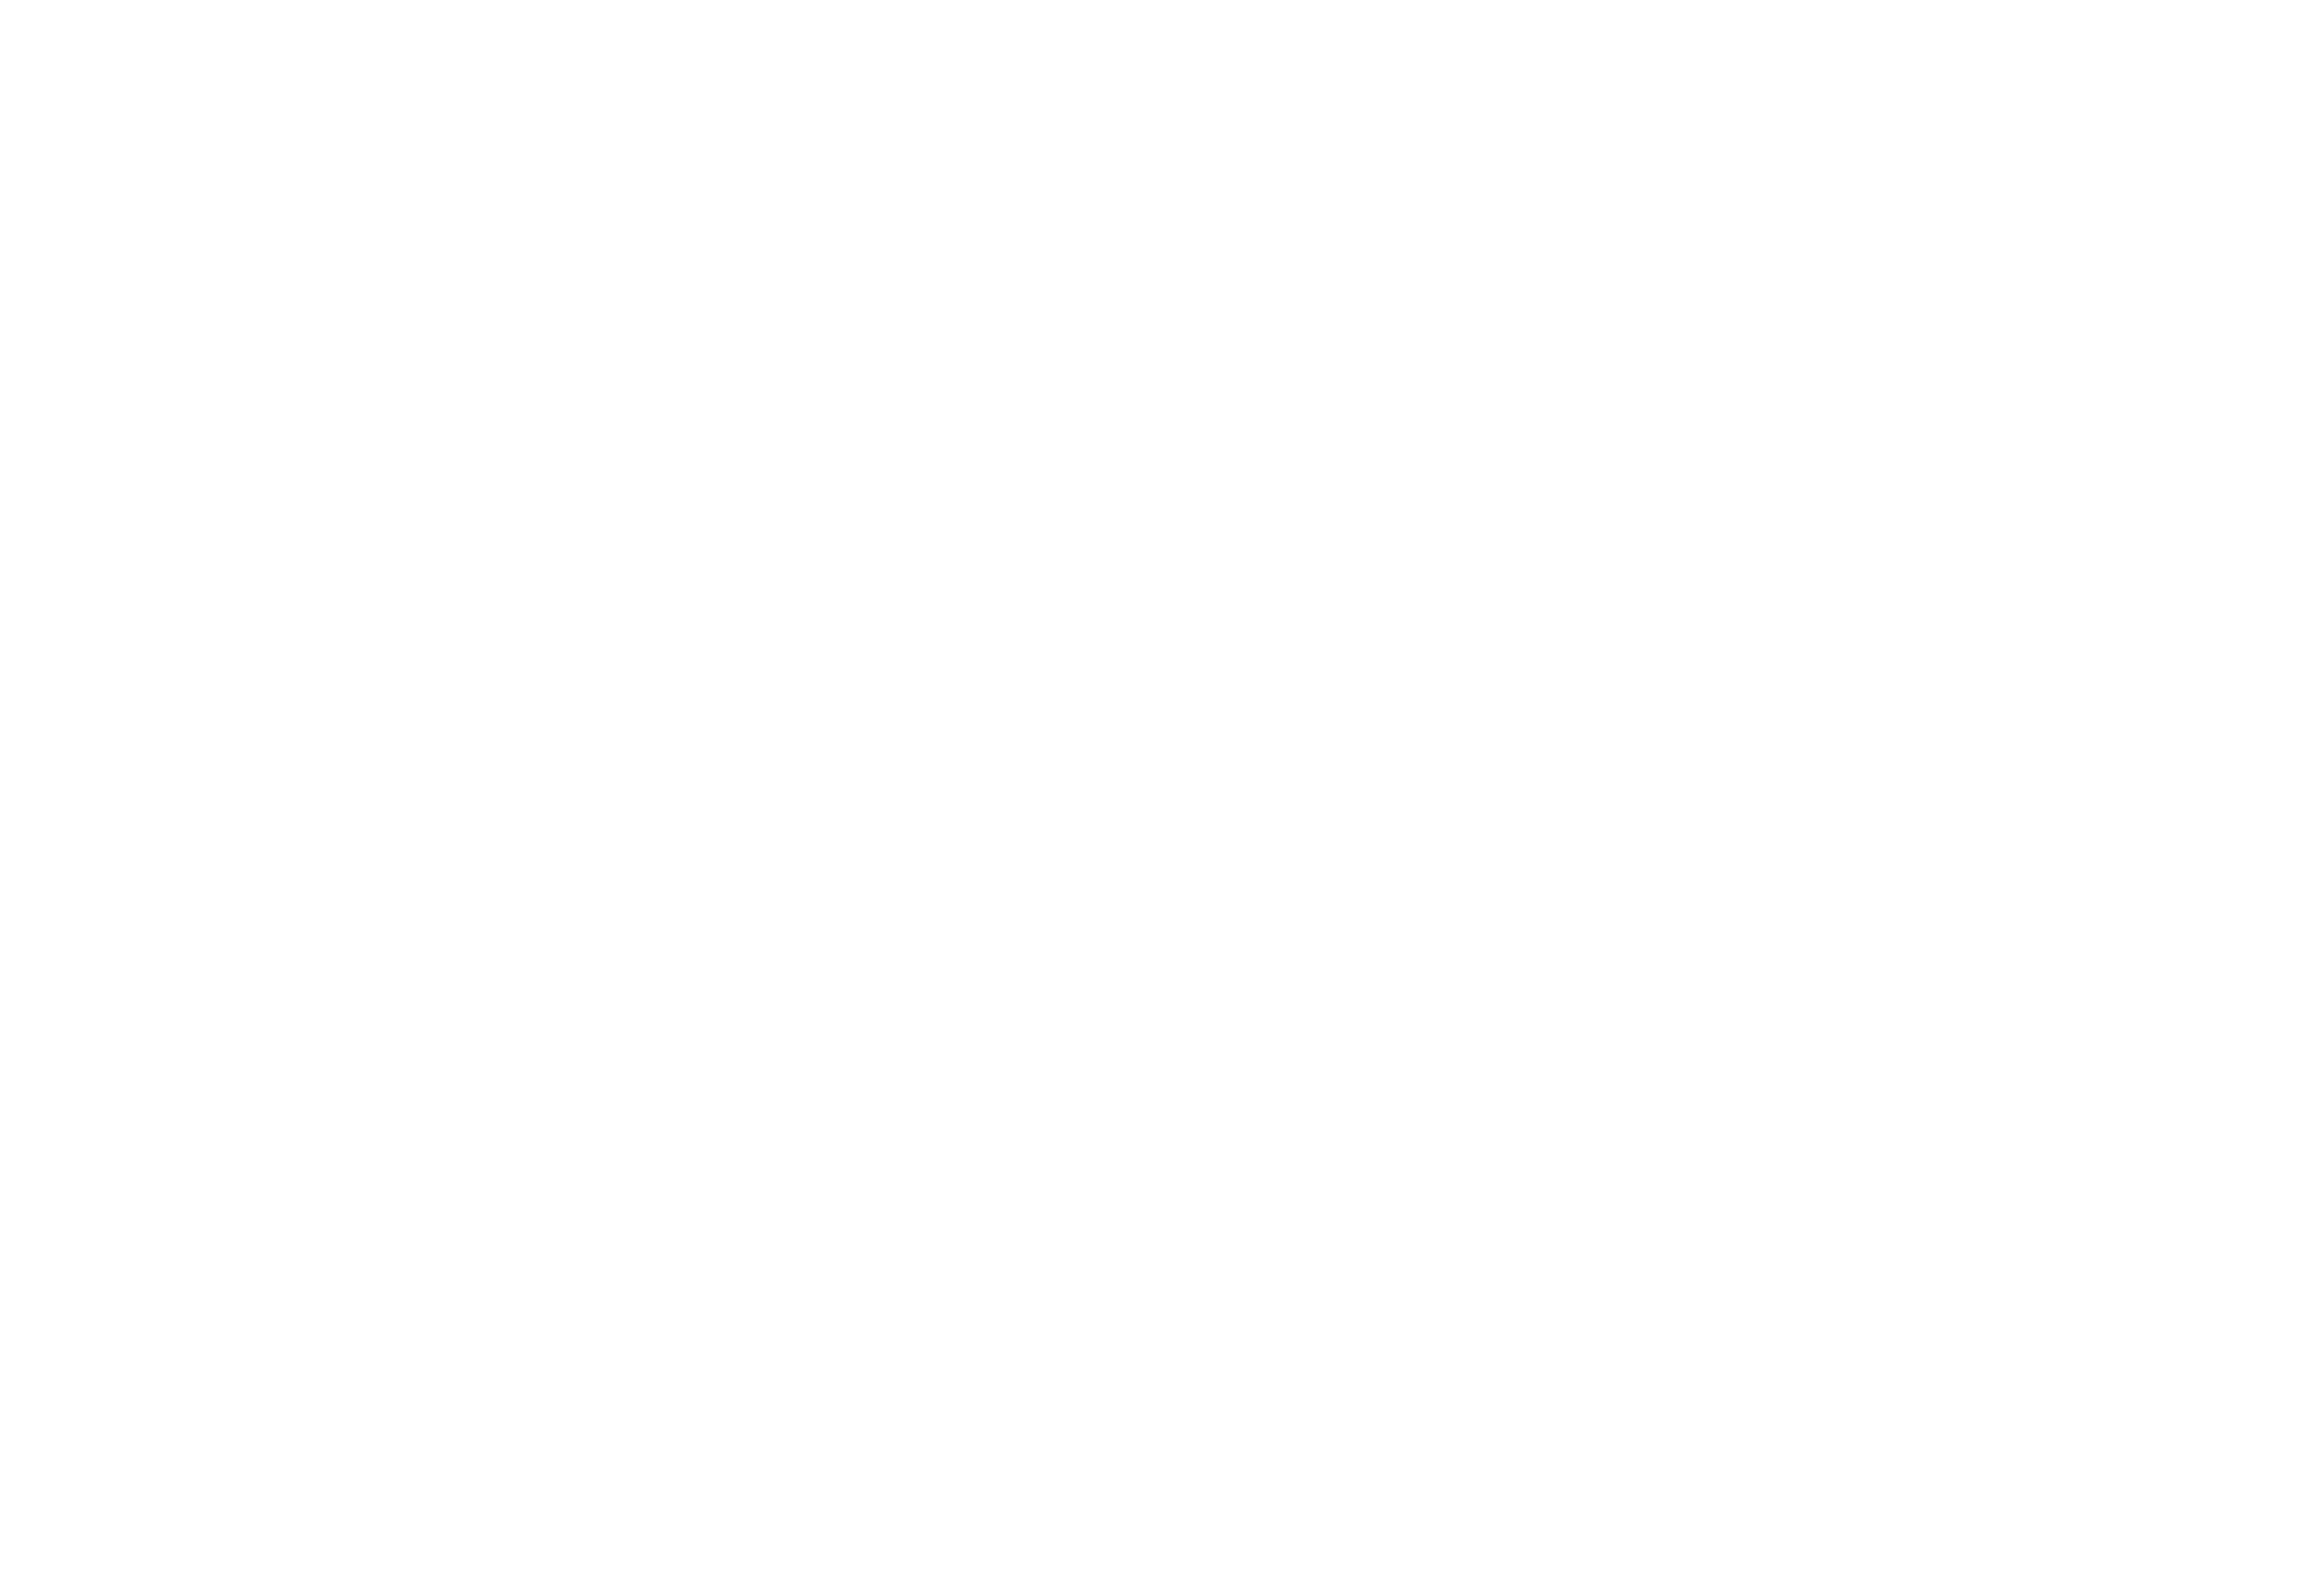 Pro Pick-Up logo with a box and arrow above it.